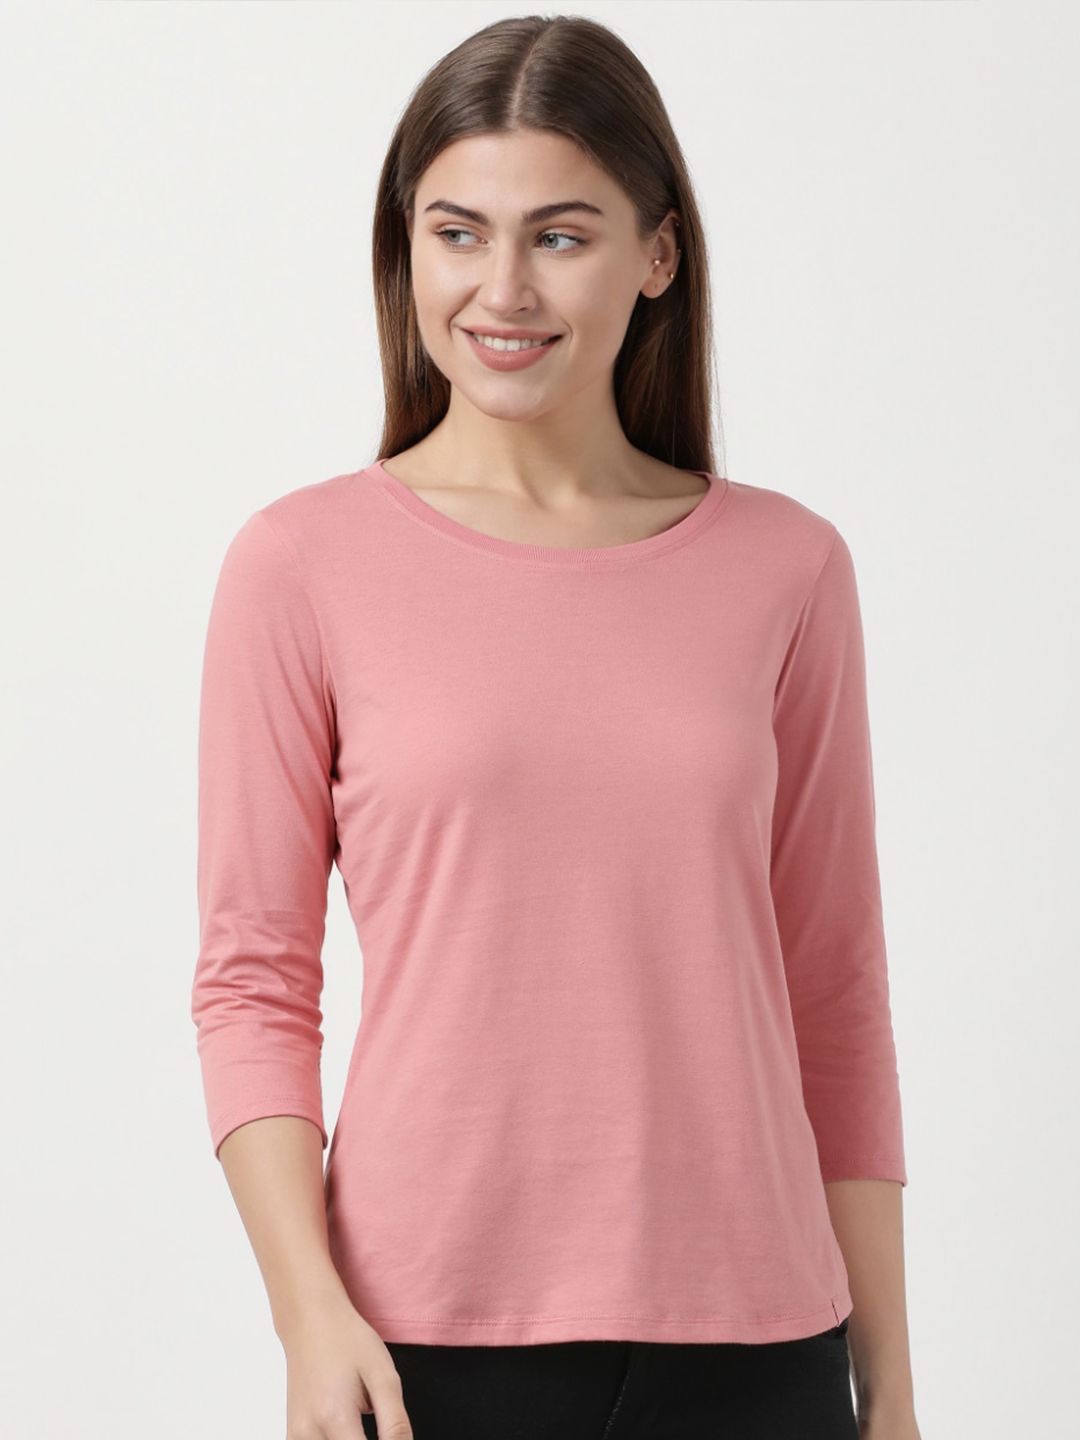 Jockey Women Pink Solid Round Neck Cotton Lounge T-shirt Price in India